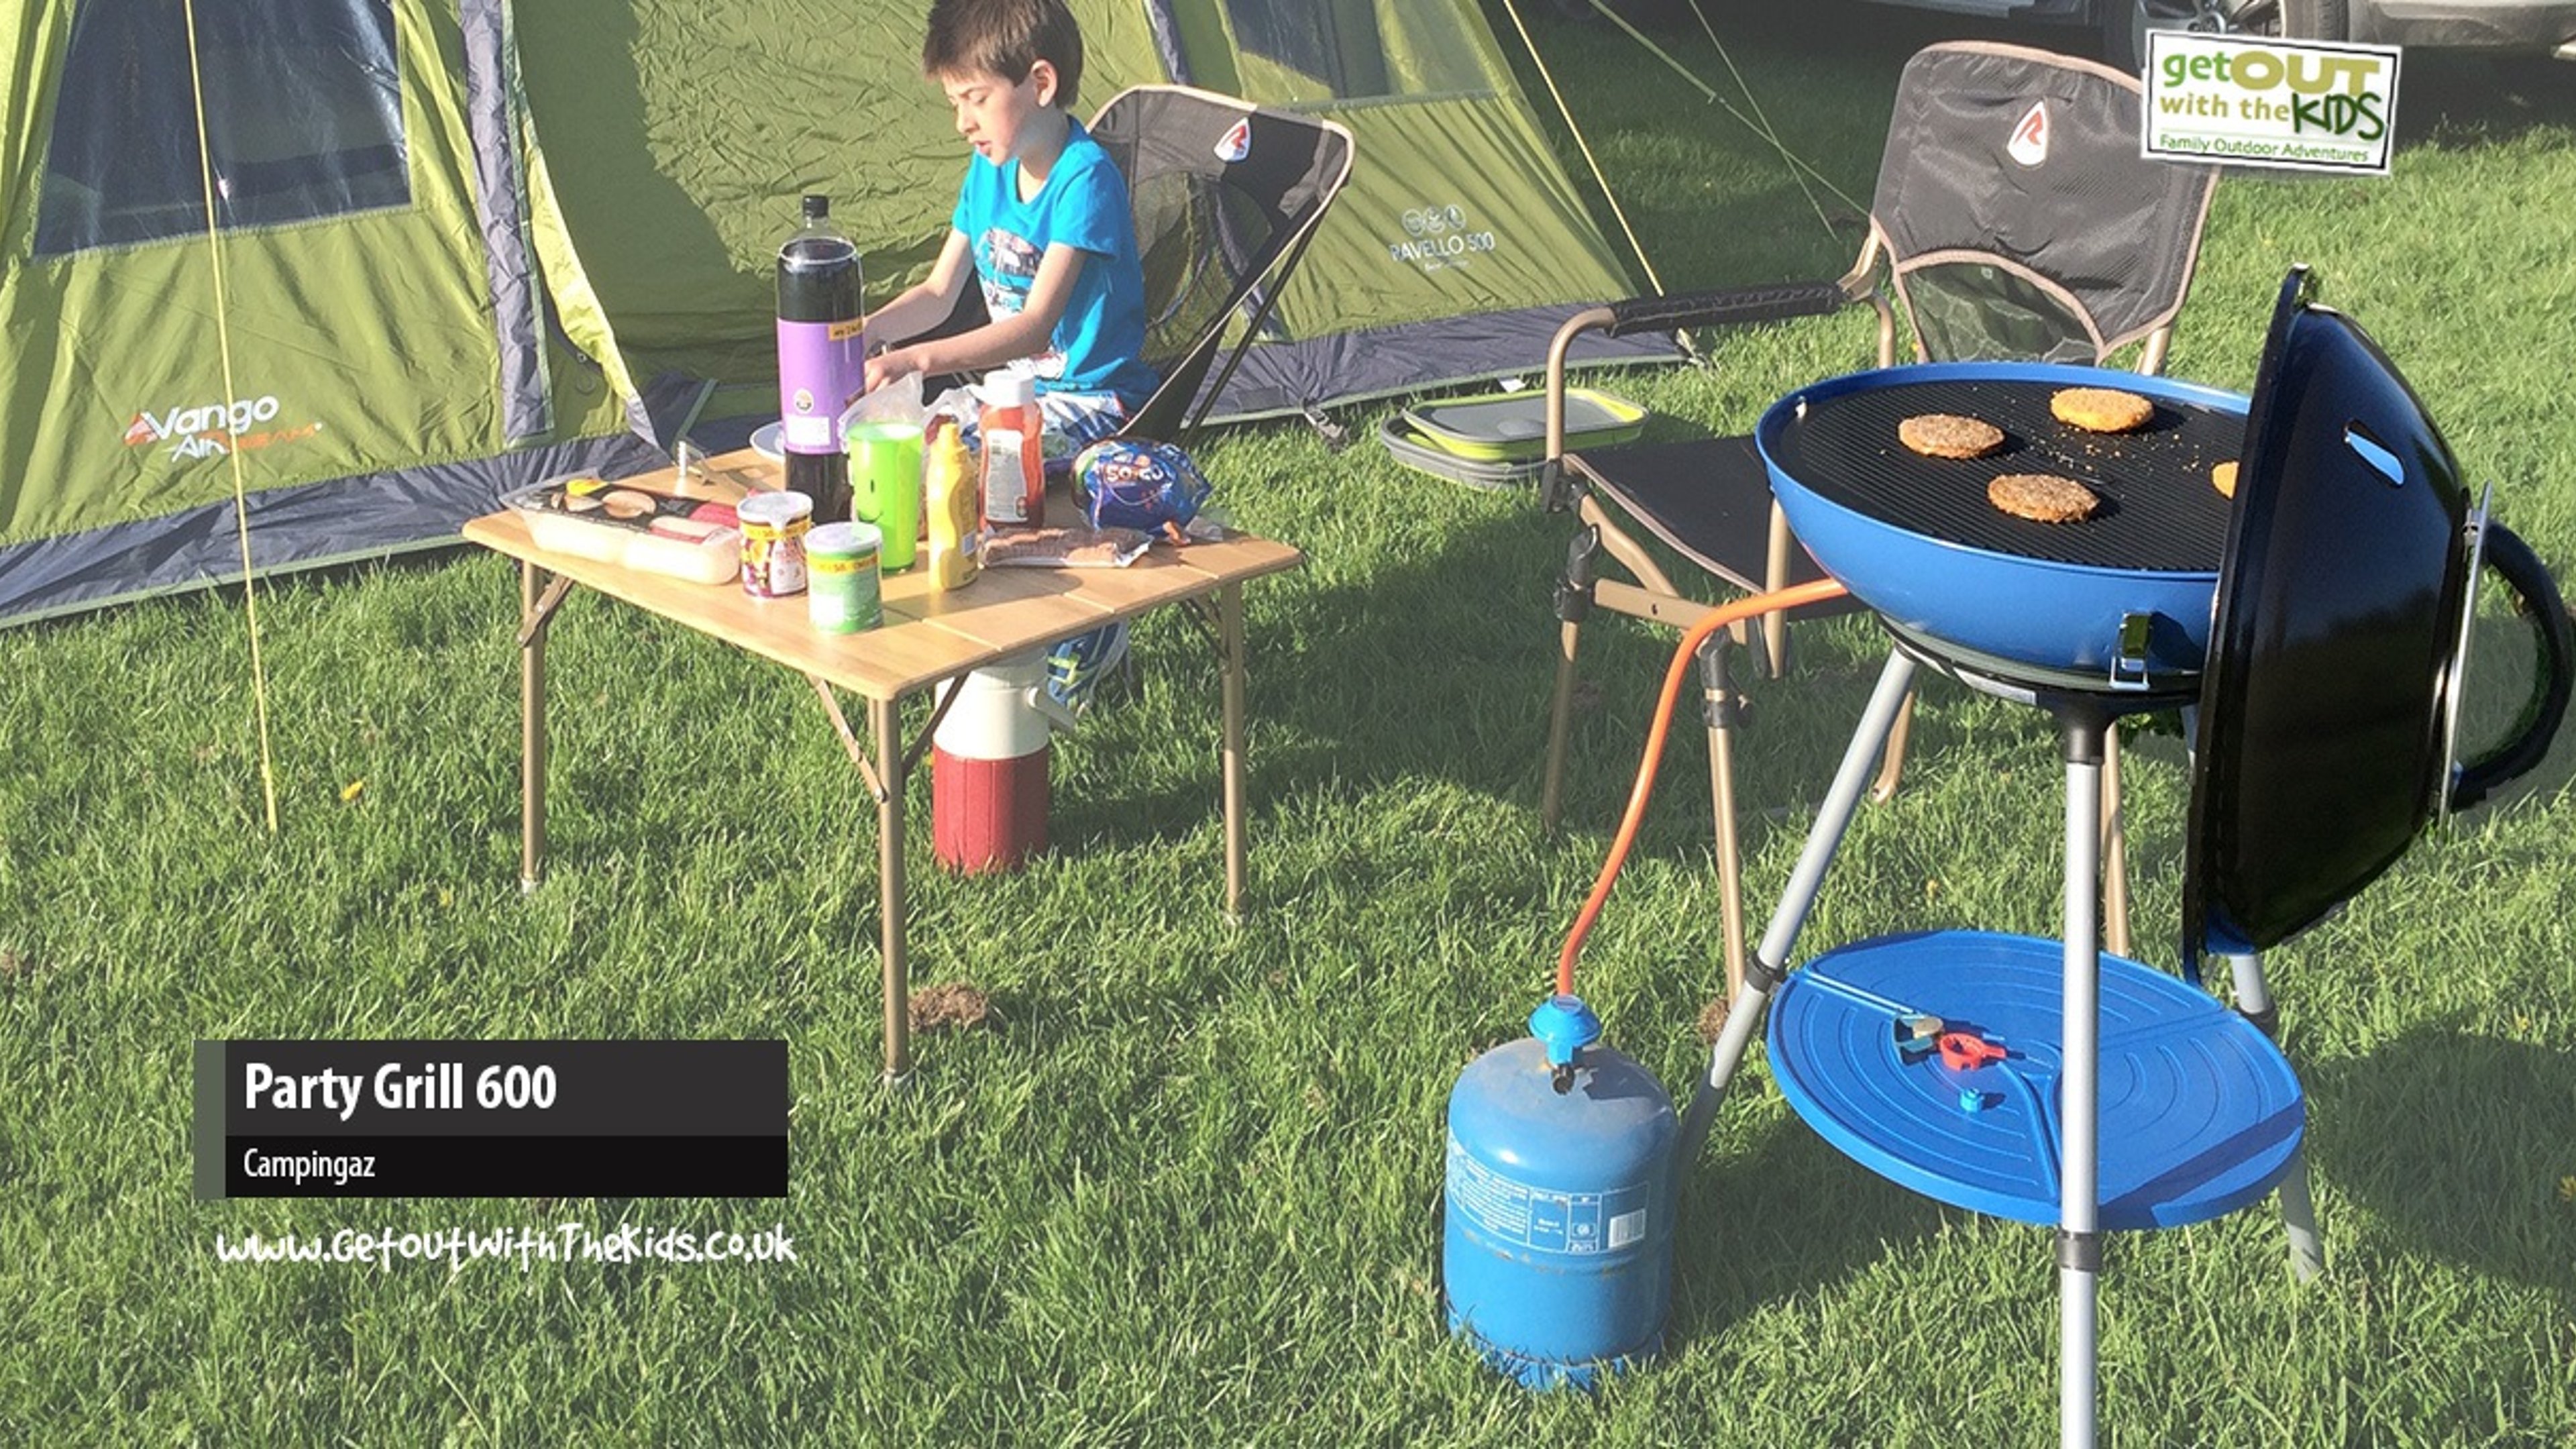 Campingaz Party Grill 600 Review